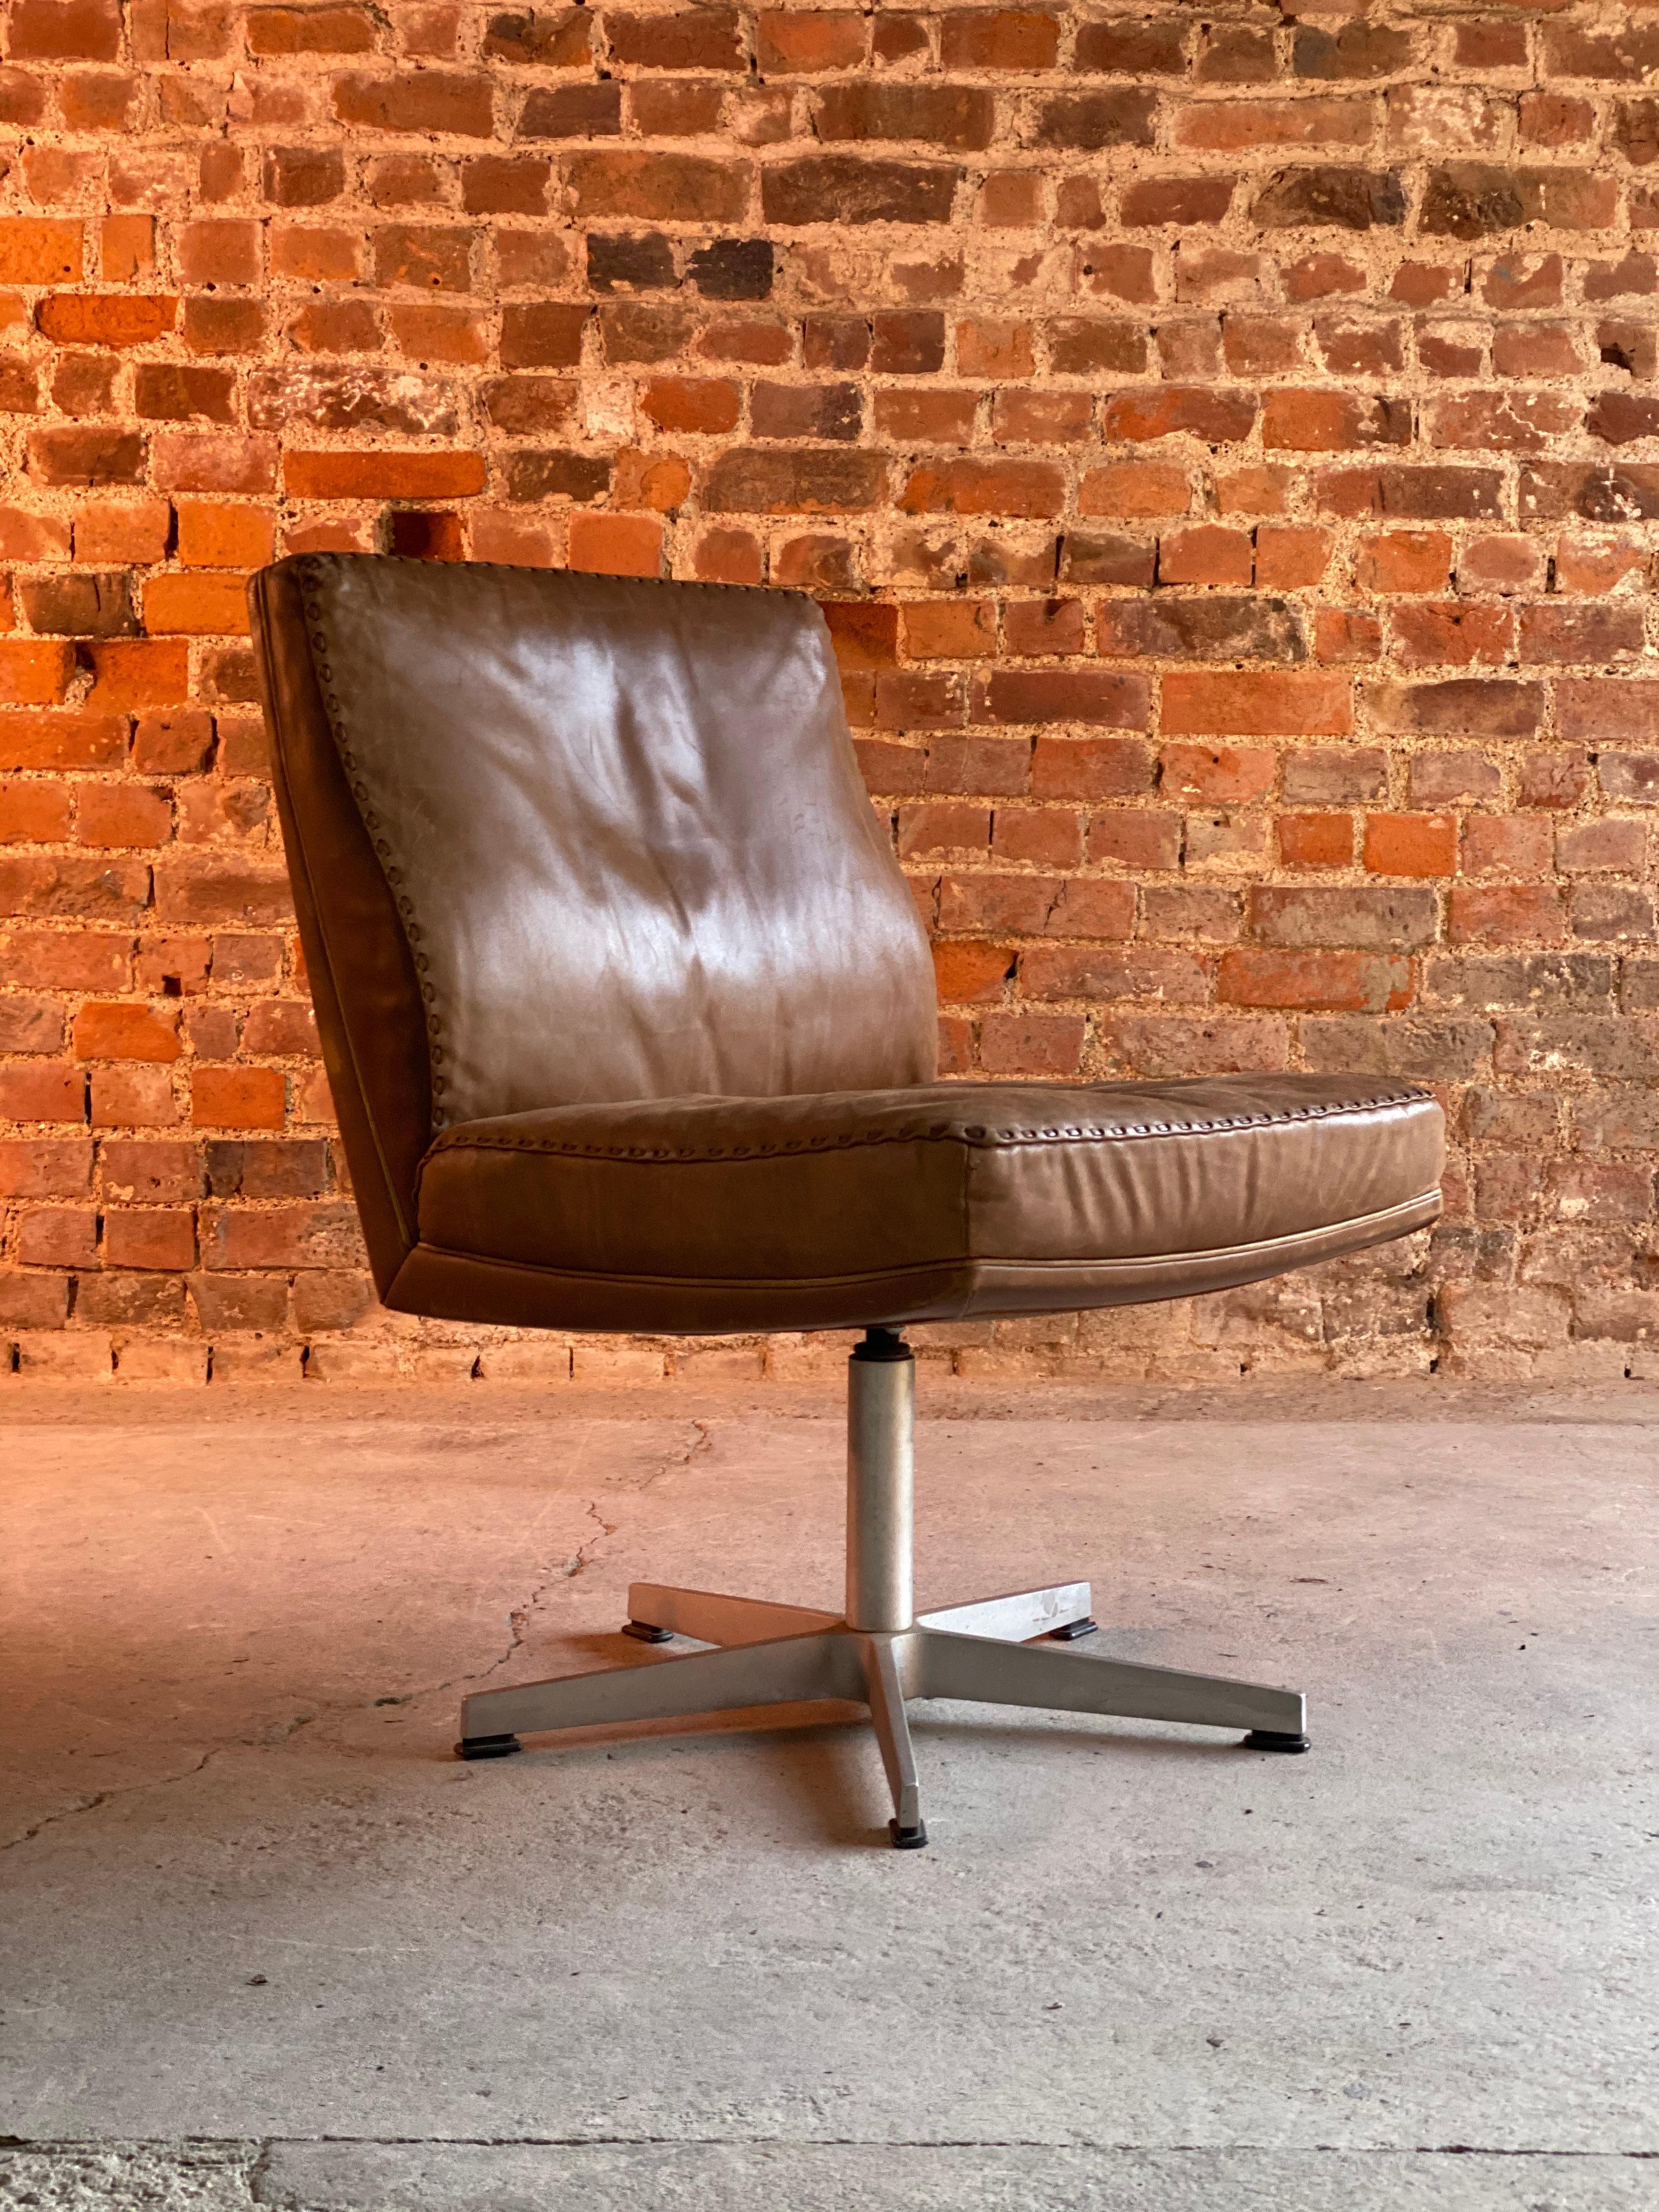 De Sede DS 35 Executive swivel desk chair, Switzerland circa 1960

Magnificent midcentury De Sede DS 35 executive office swivel desk chair Switzerland circa 1960, upholstered in the finest tan leather with broad stitch edge detail, raised on